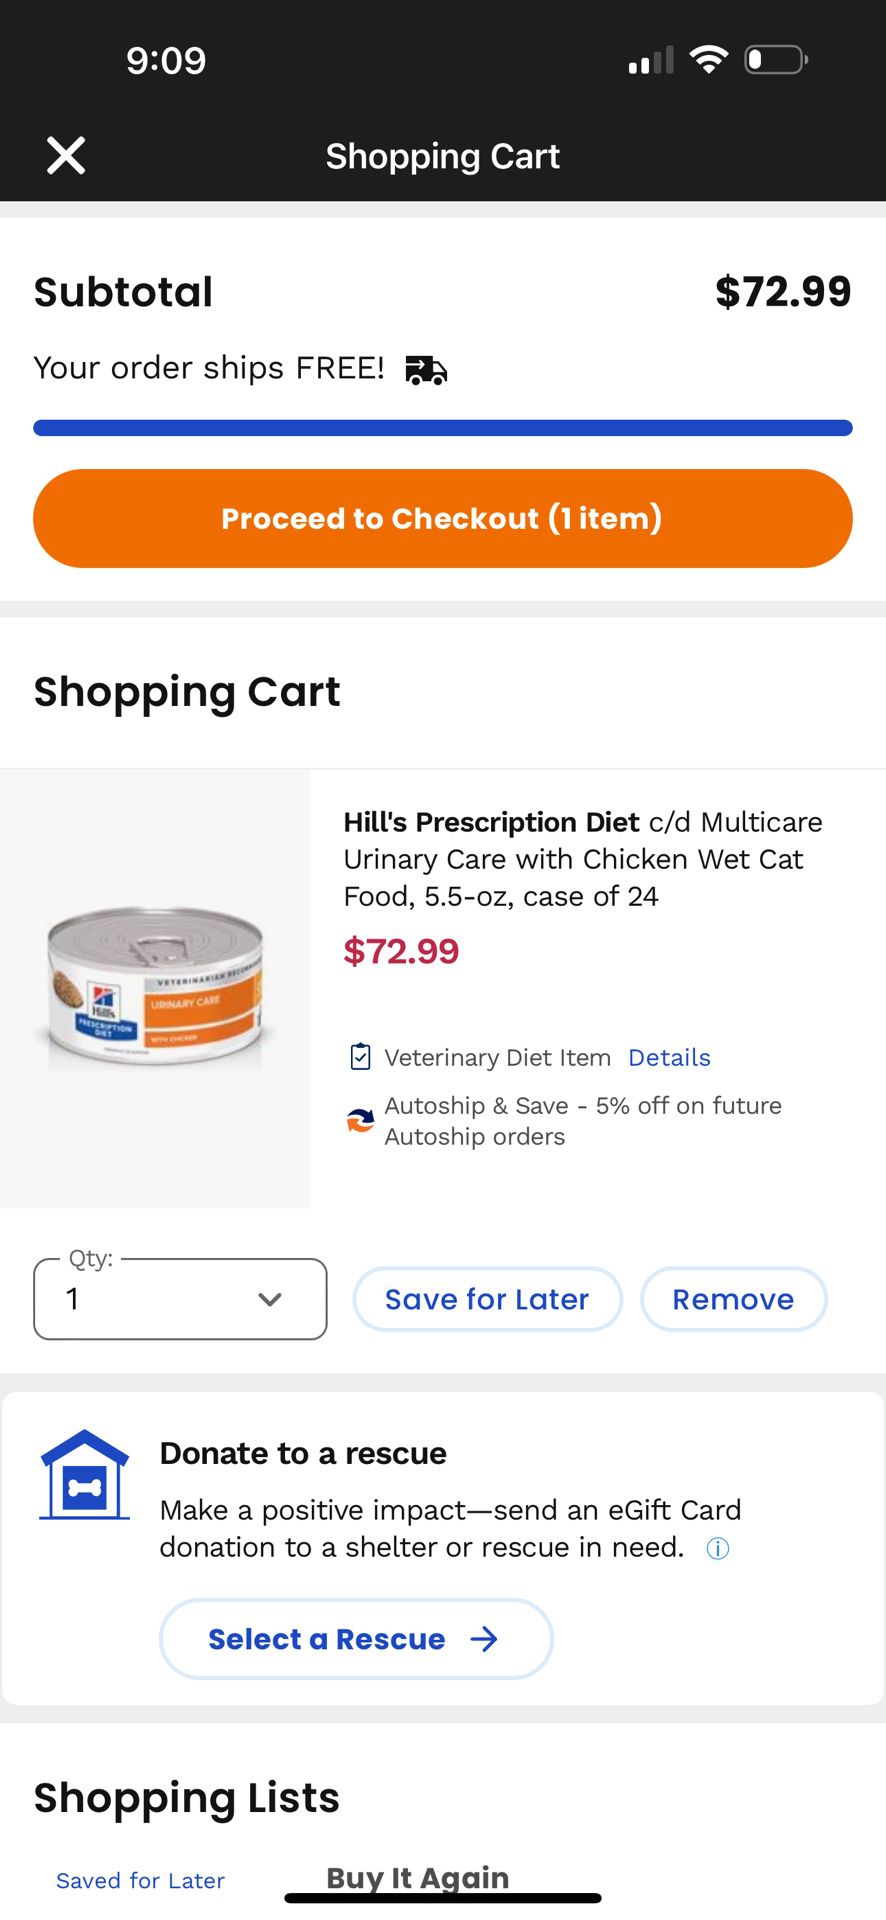 Hill's Prescription Diet c/d Multicare Urinary Care with Chicken Wet Cat Food